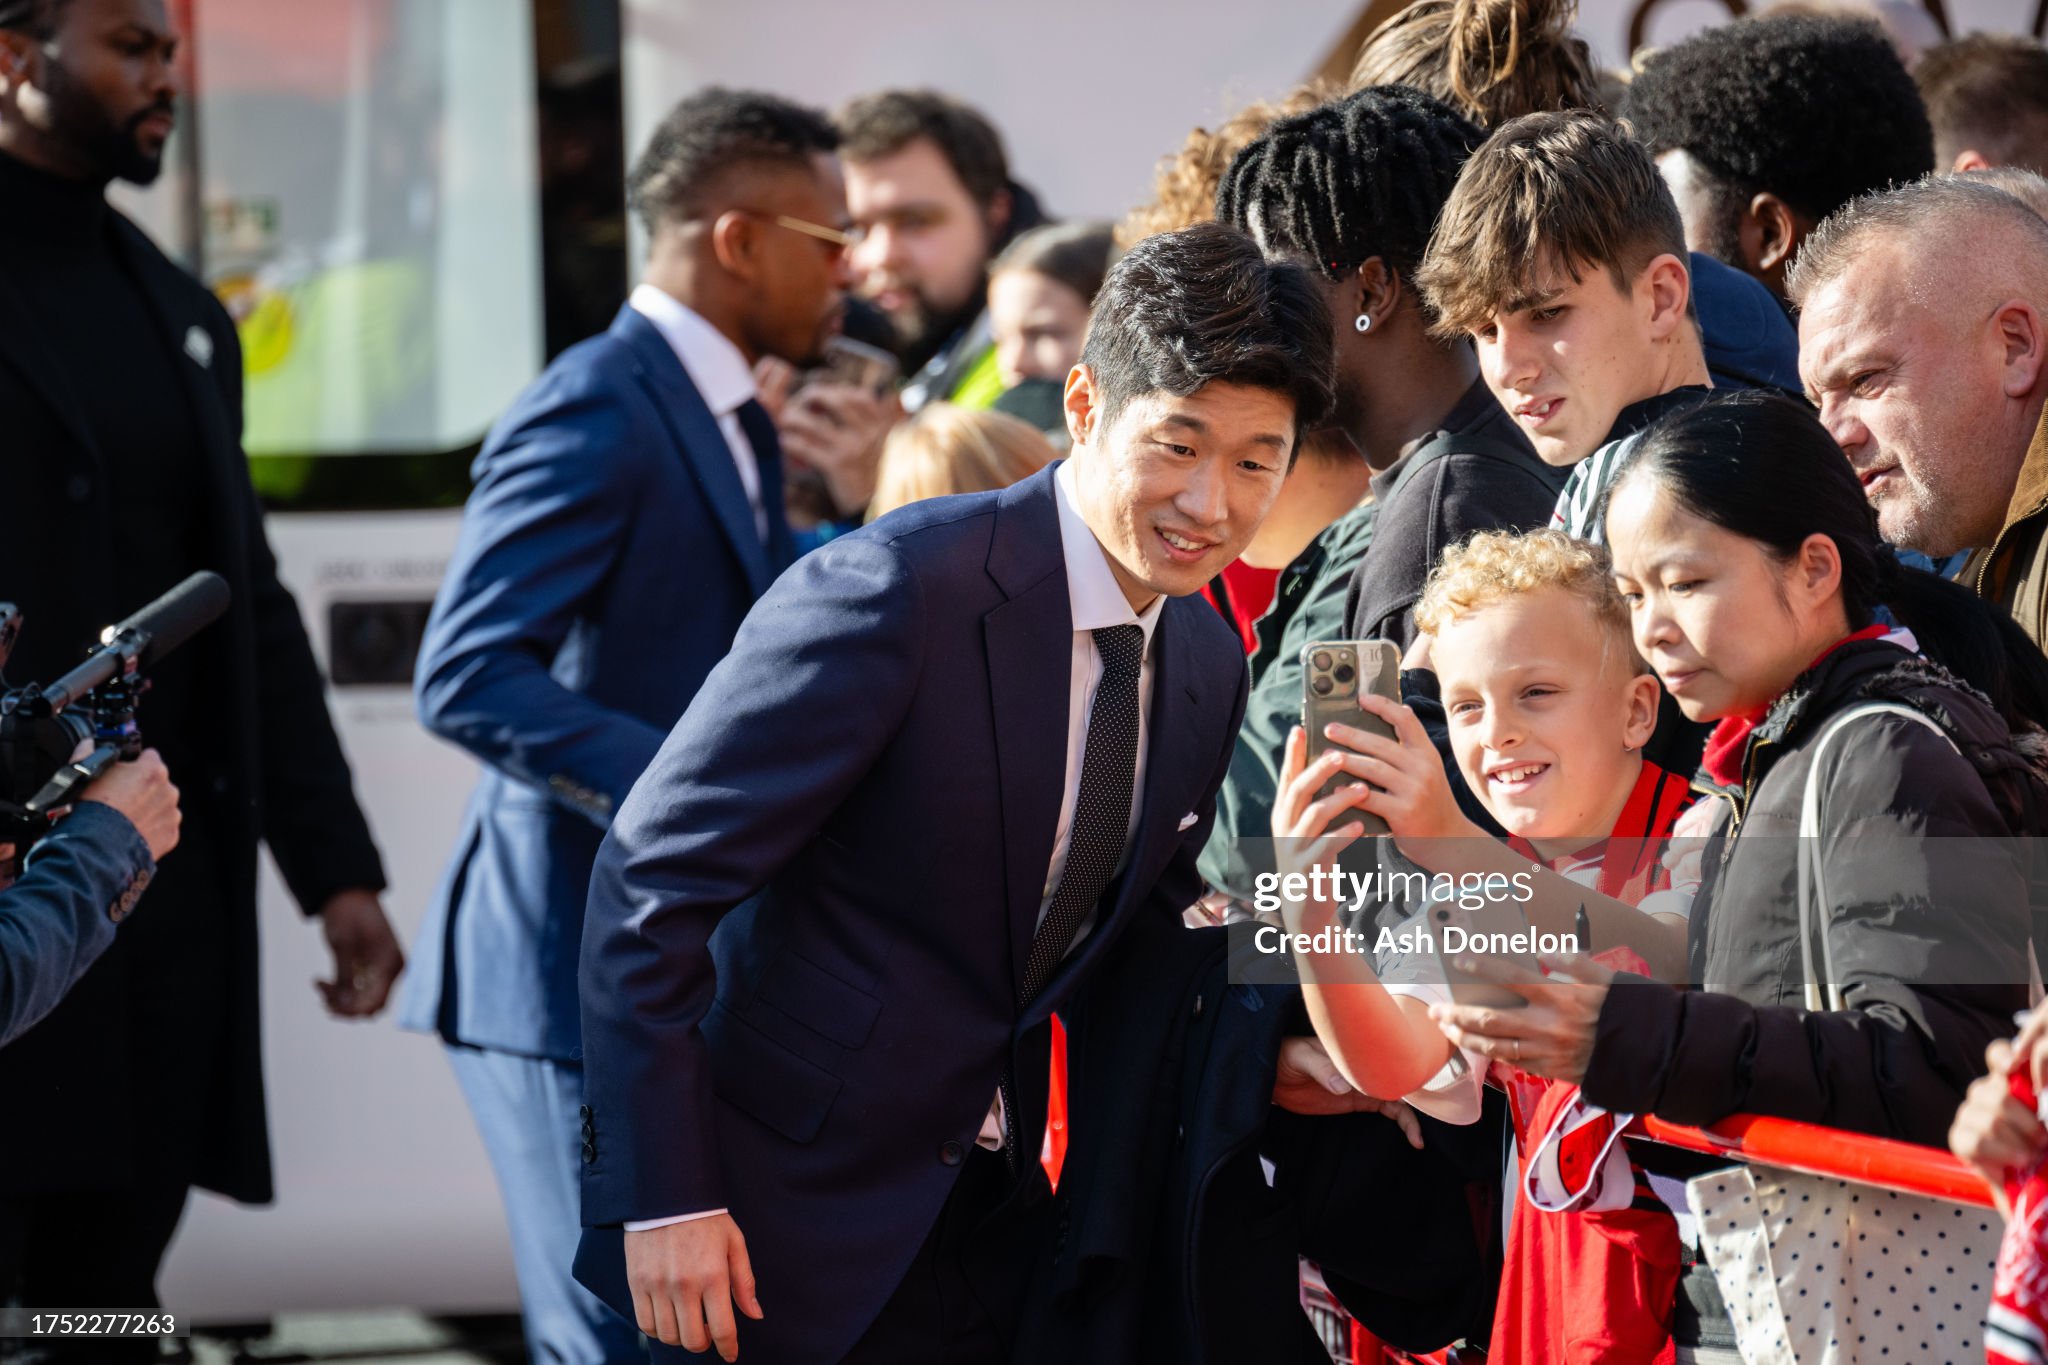 gettyimages-1752277263-2048x2048.jpg